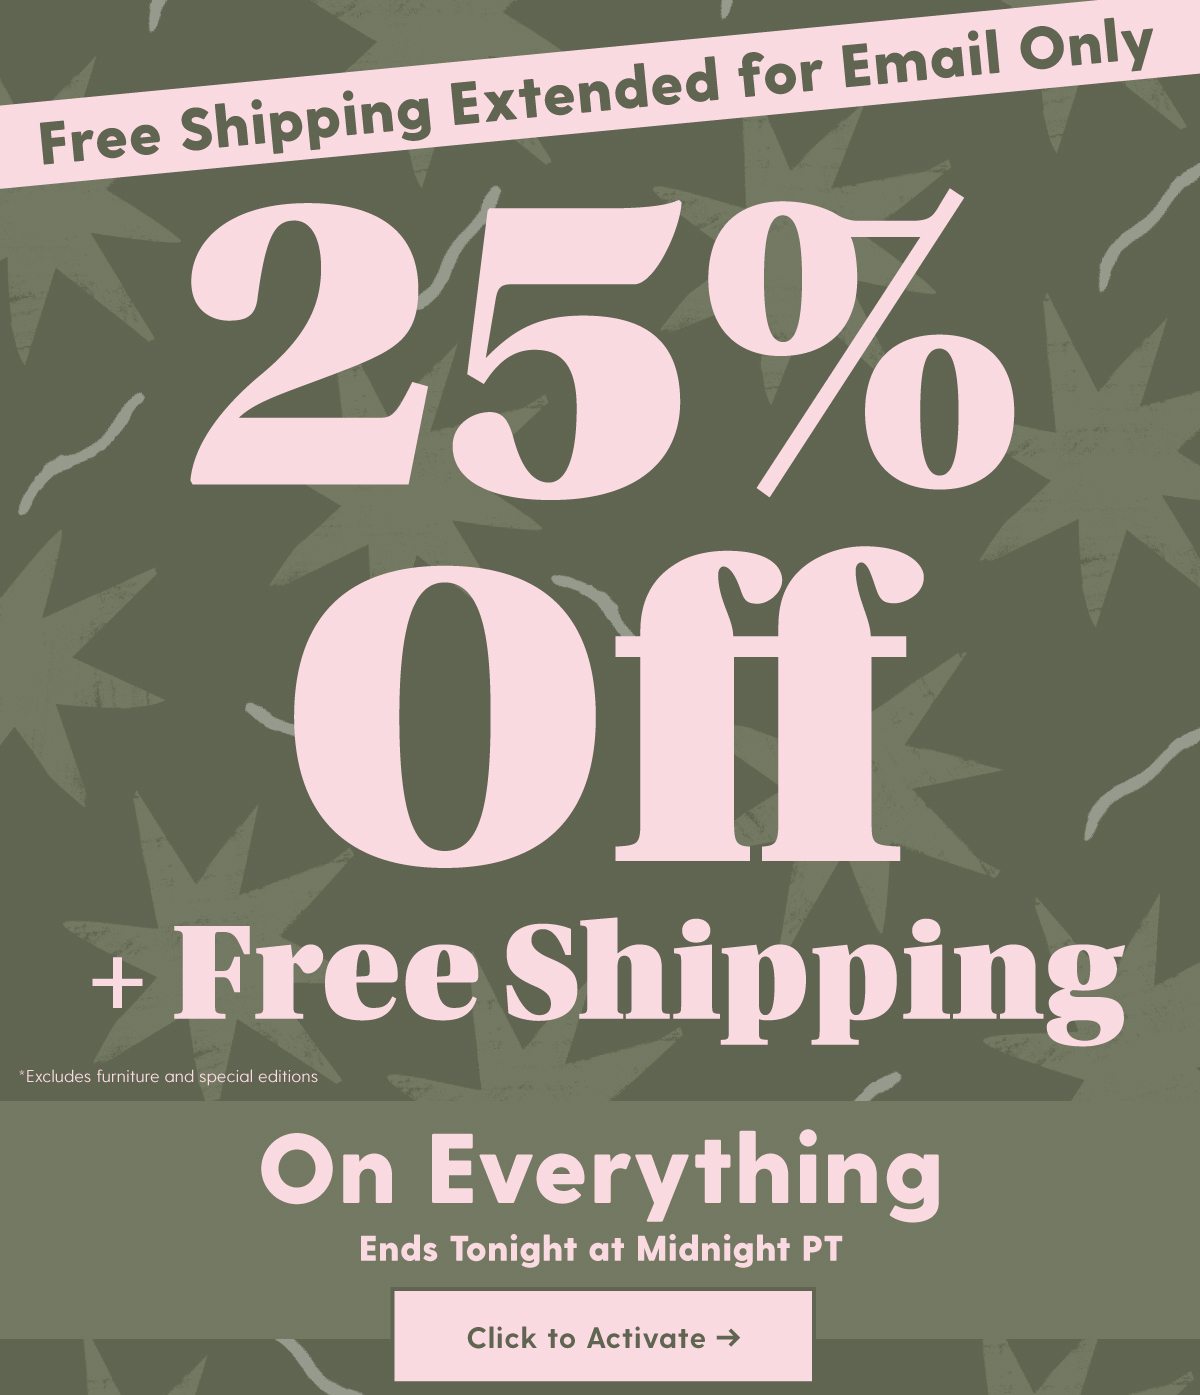 25% Off Everything Today Shop Comforters > *Excludes special editions + furniture.